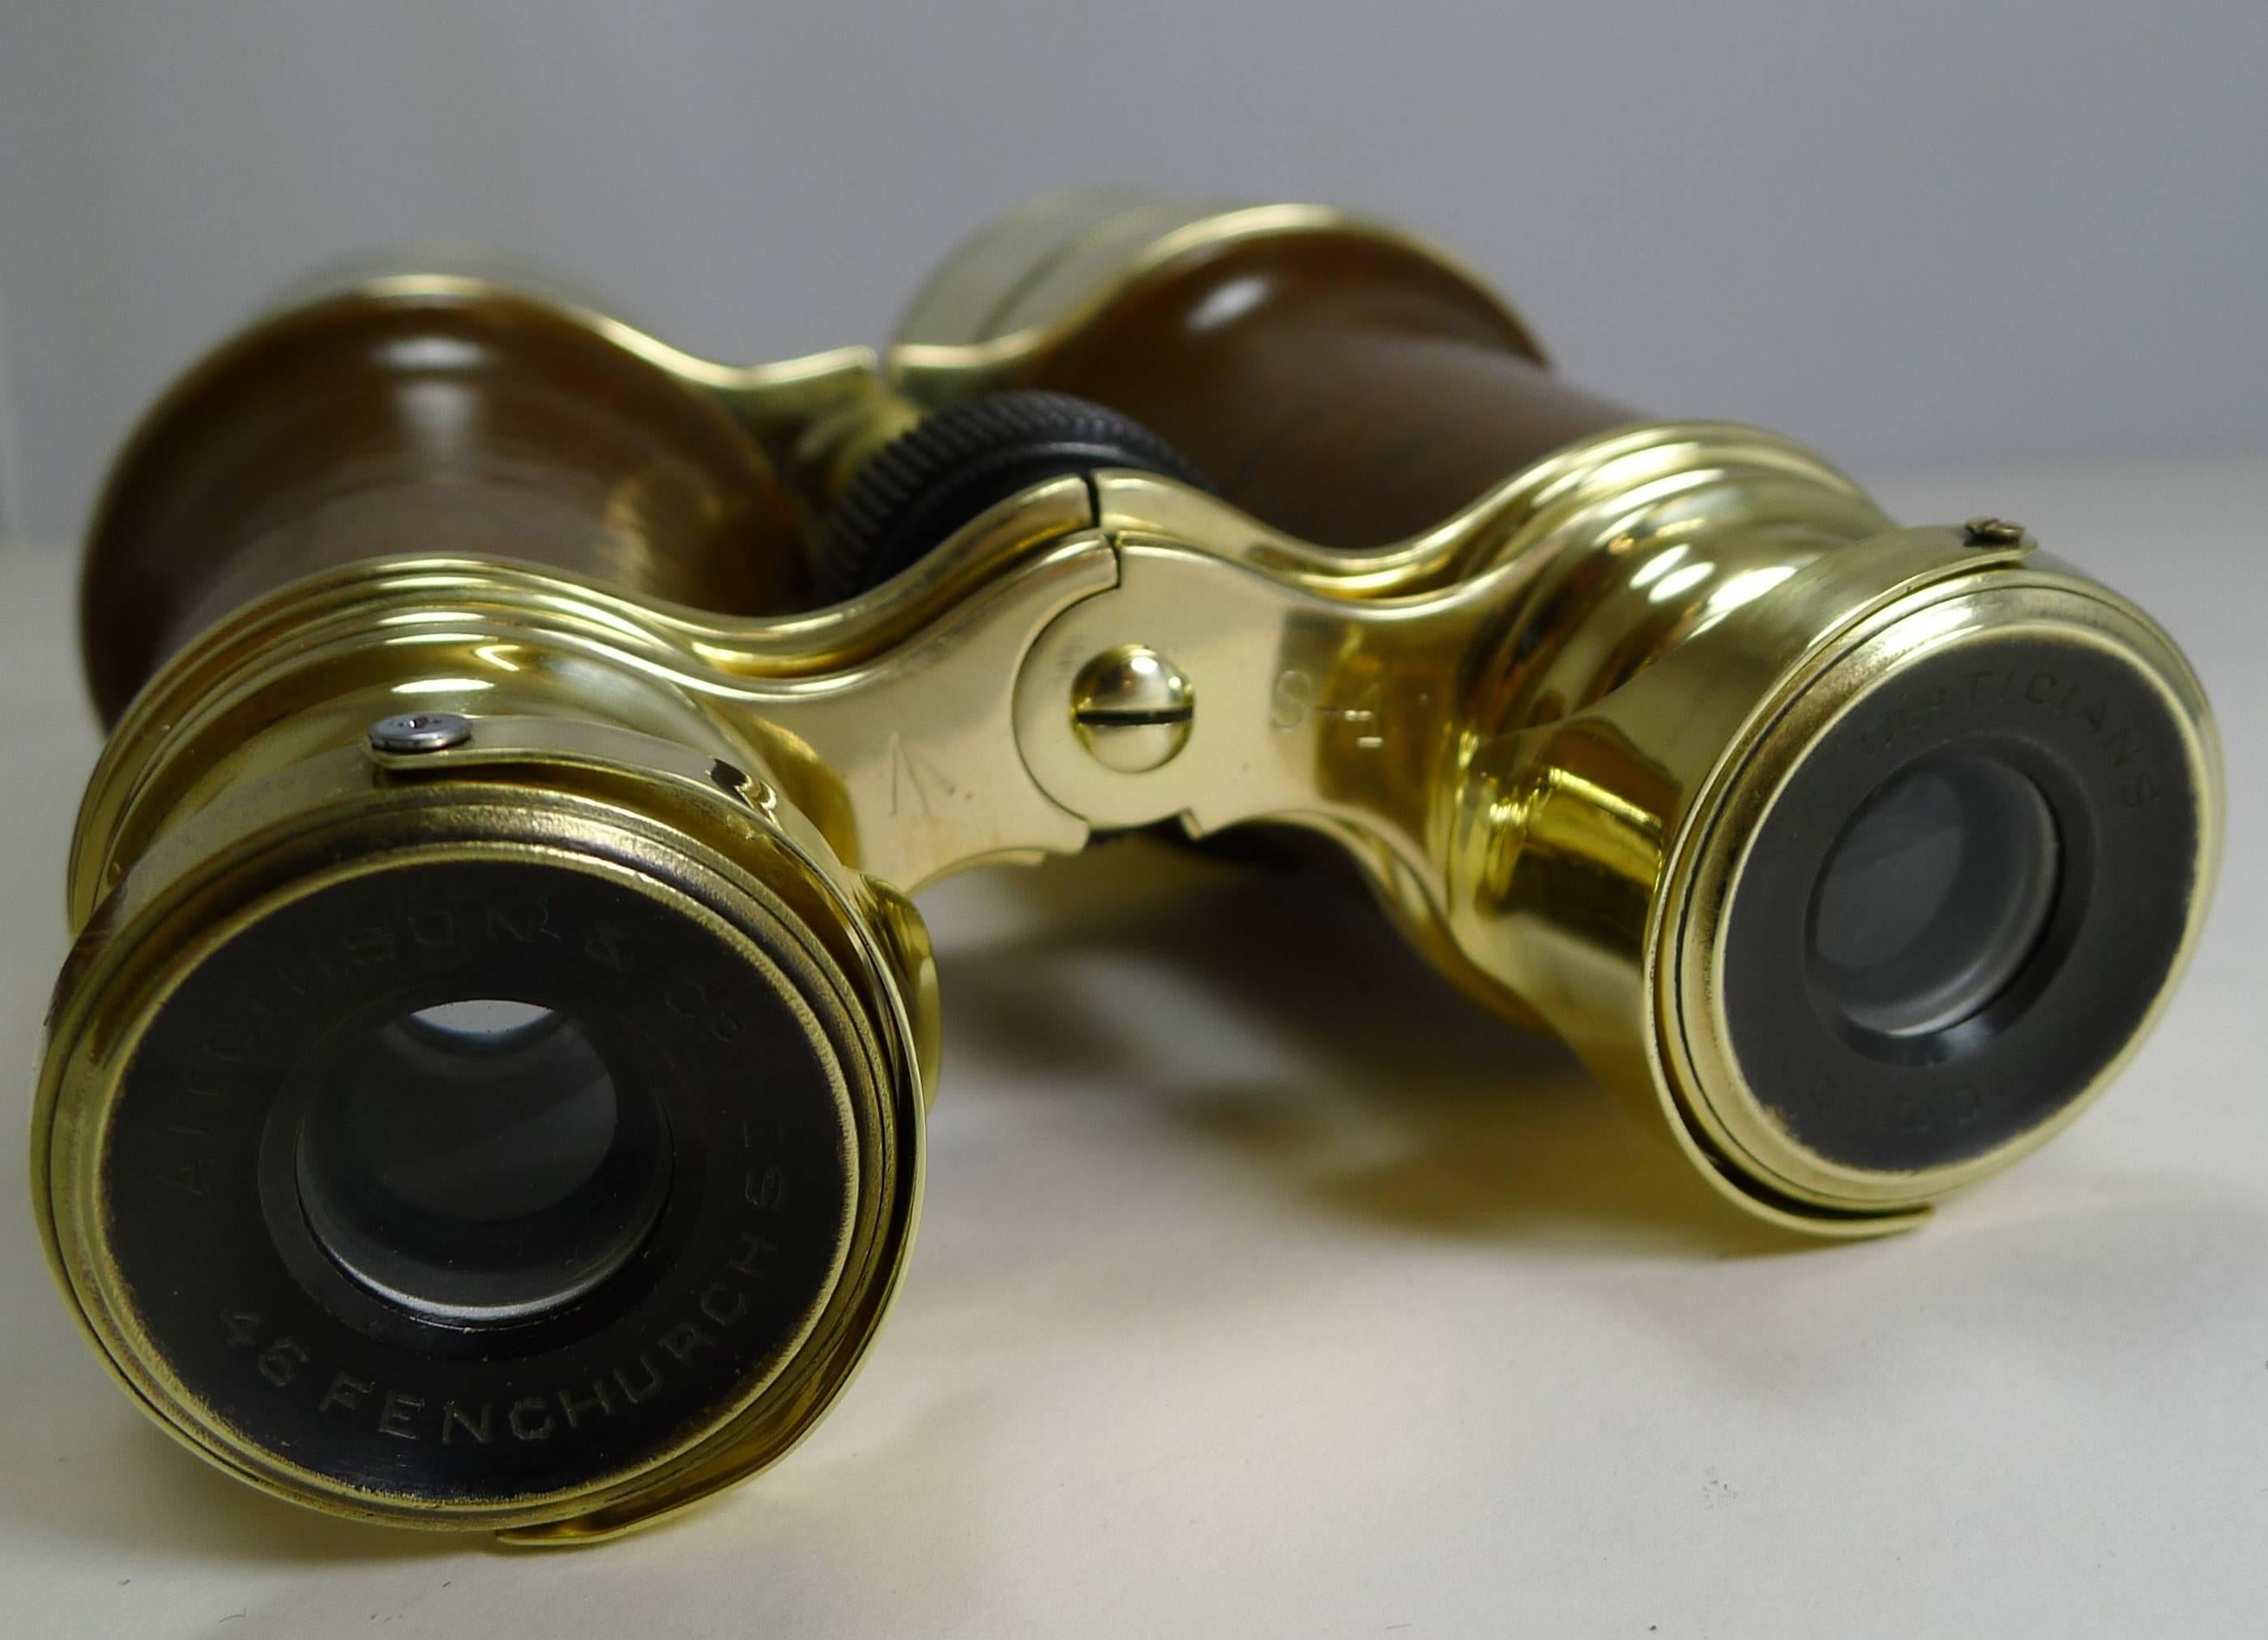 Brass Pair of WWI Binoculars and Case, British Officer's Issue, 1918, Signed